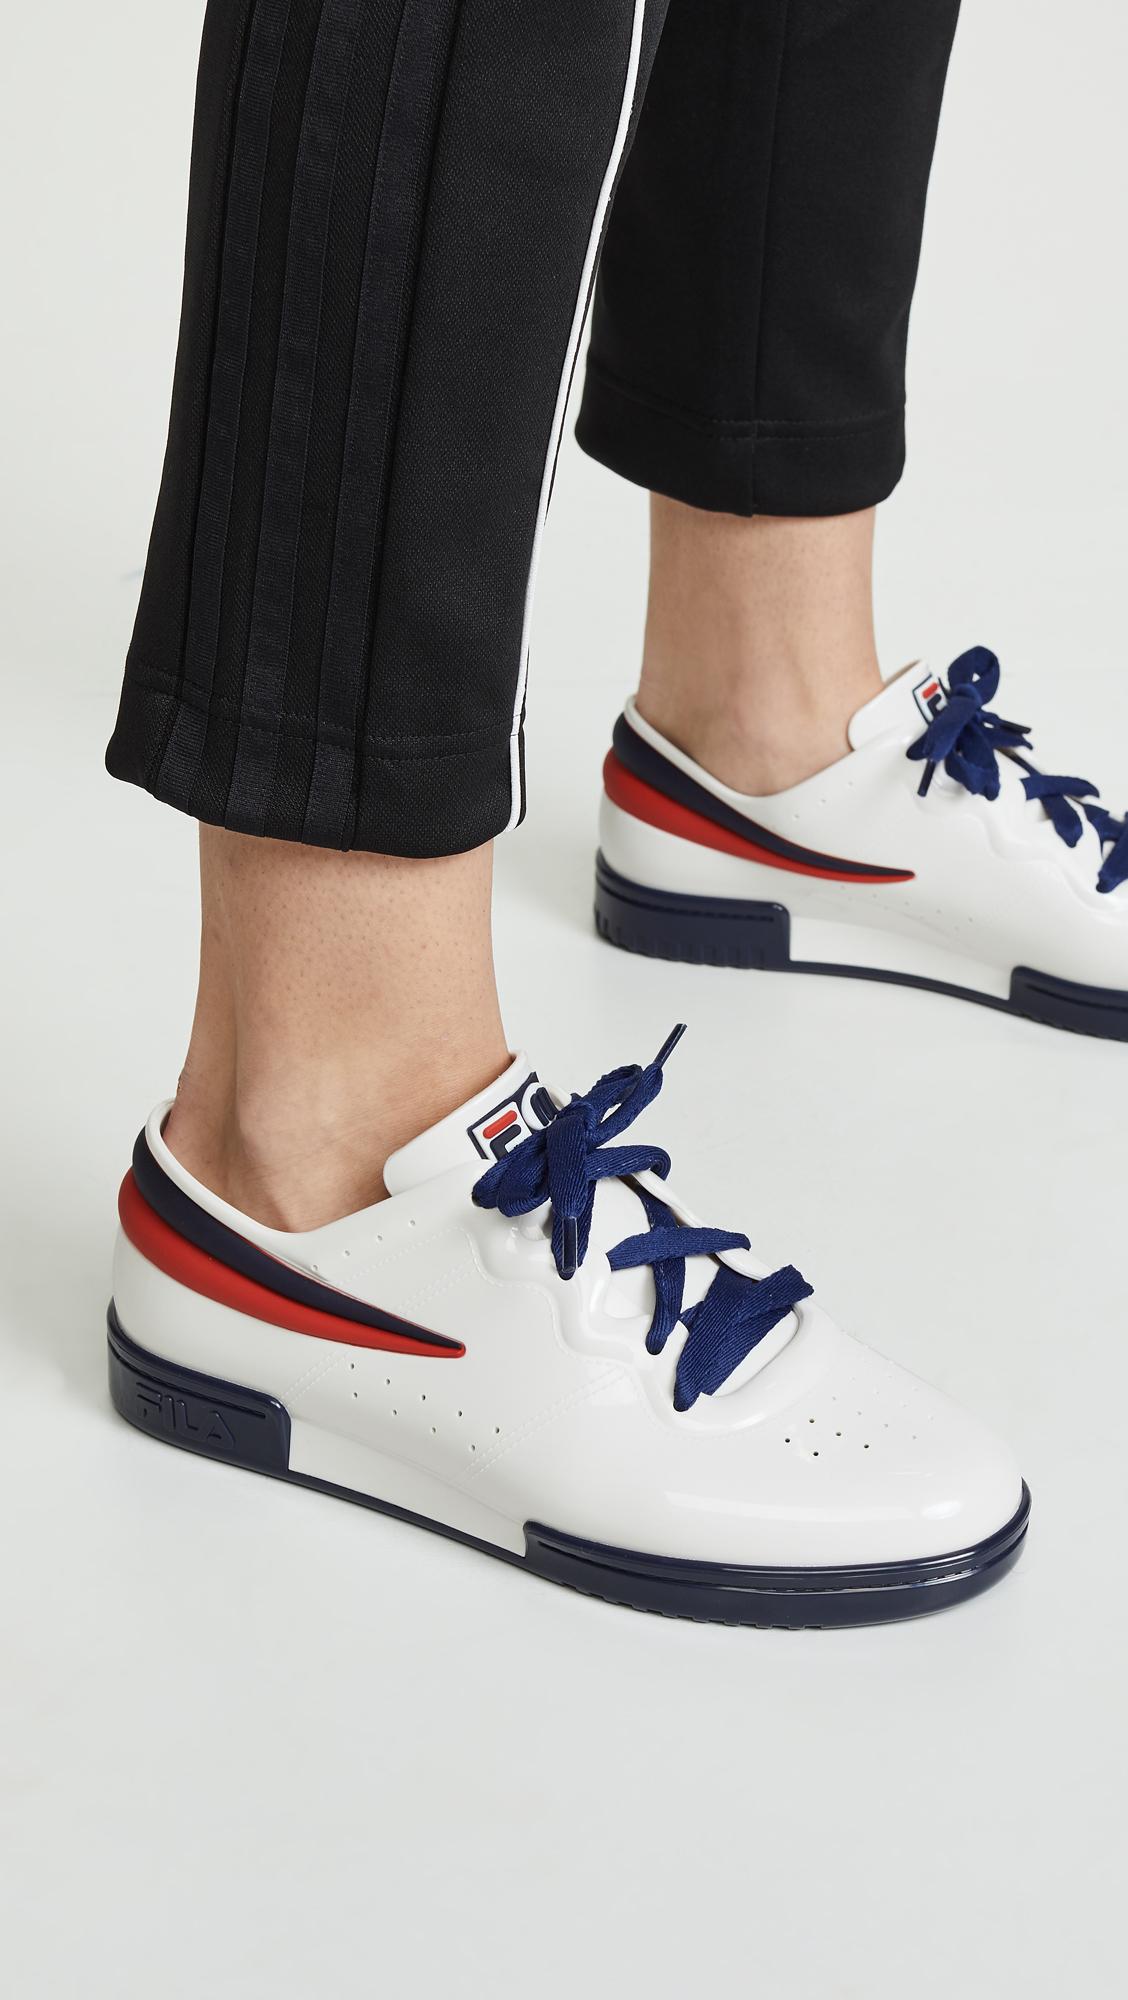 Melissa X Fila Sneakers in White/Blue/Red (Blue) | Lyst